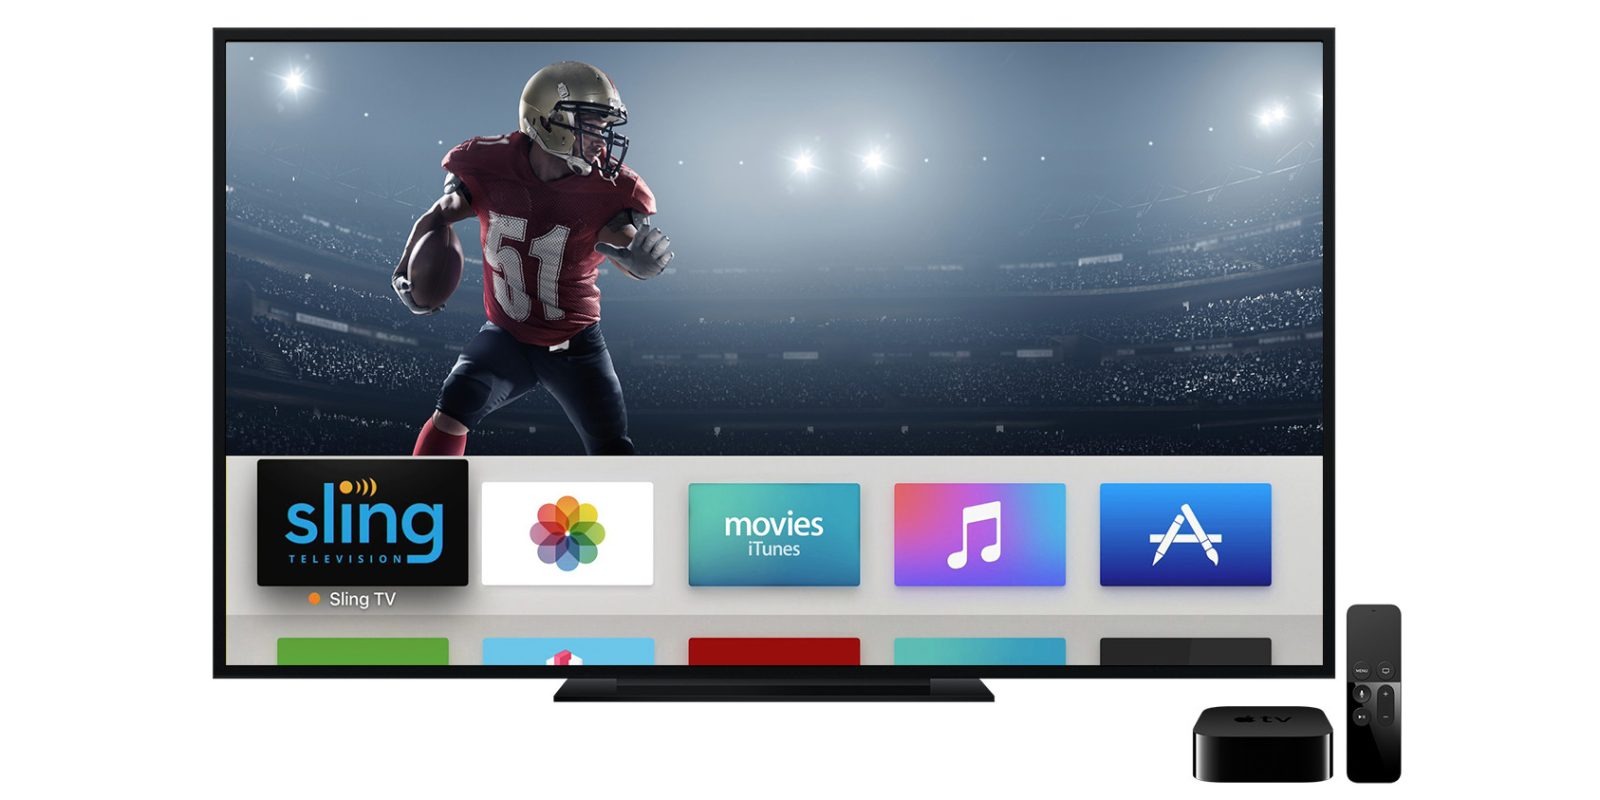 How To Watch Super Bowl On Sling